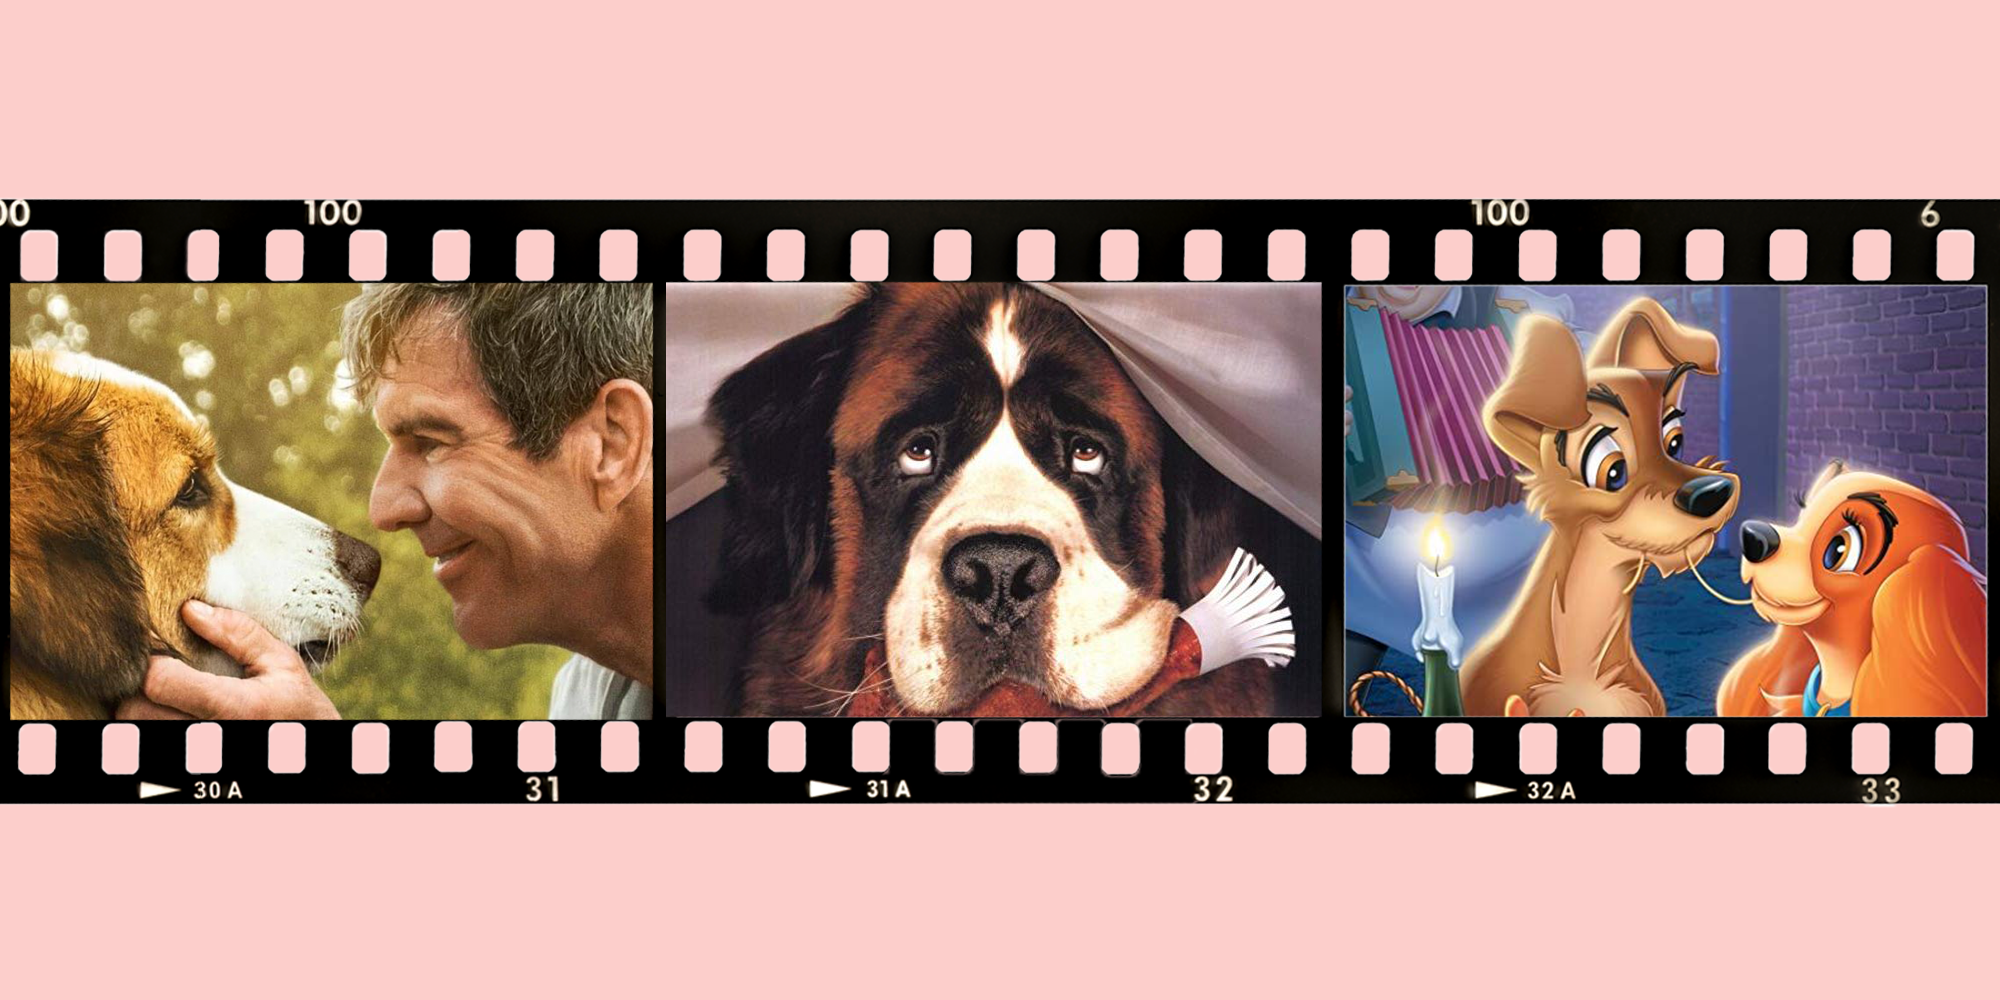 Furry Horse Sex Dog - 20+ Best Dog Movies to Watch - Best Movies About Dogs to Stream